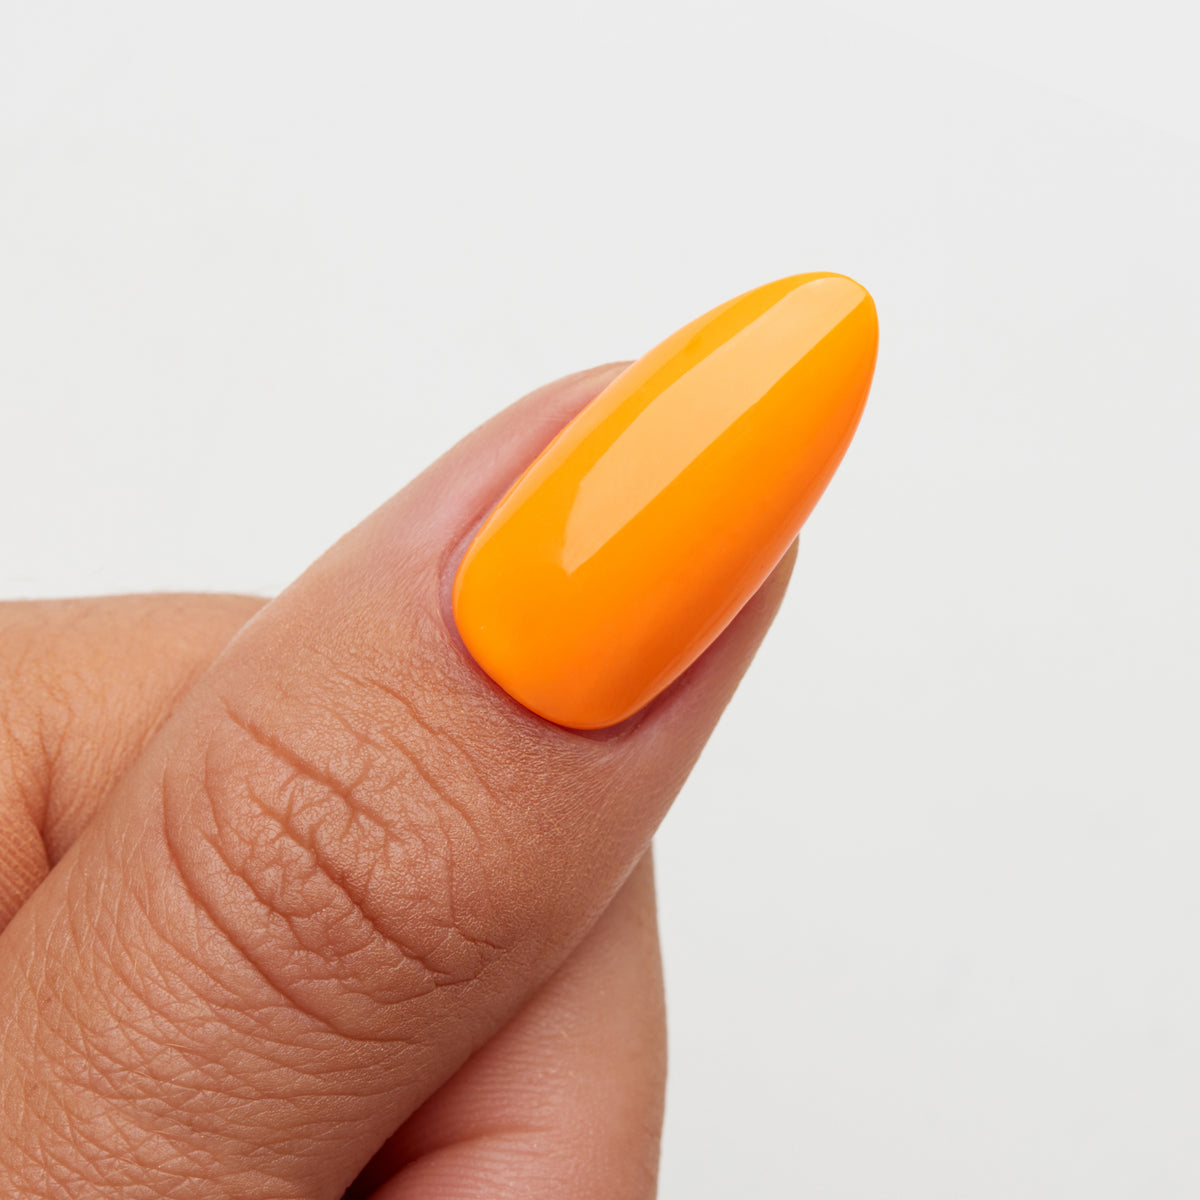 Gelous Tropical Punch gel nail polish swatch - photographed in Australia